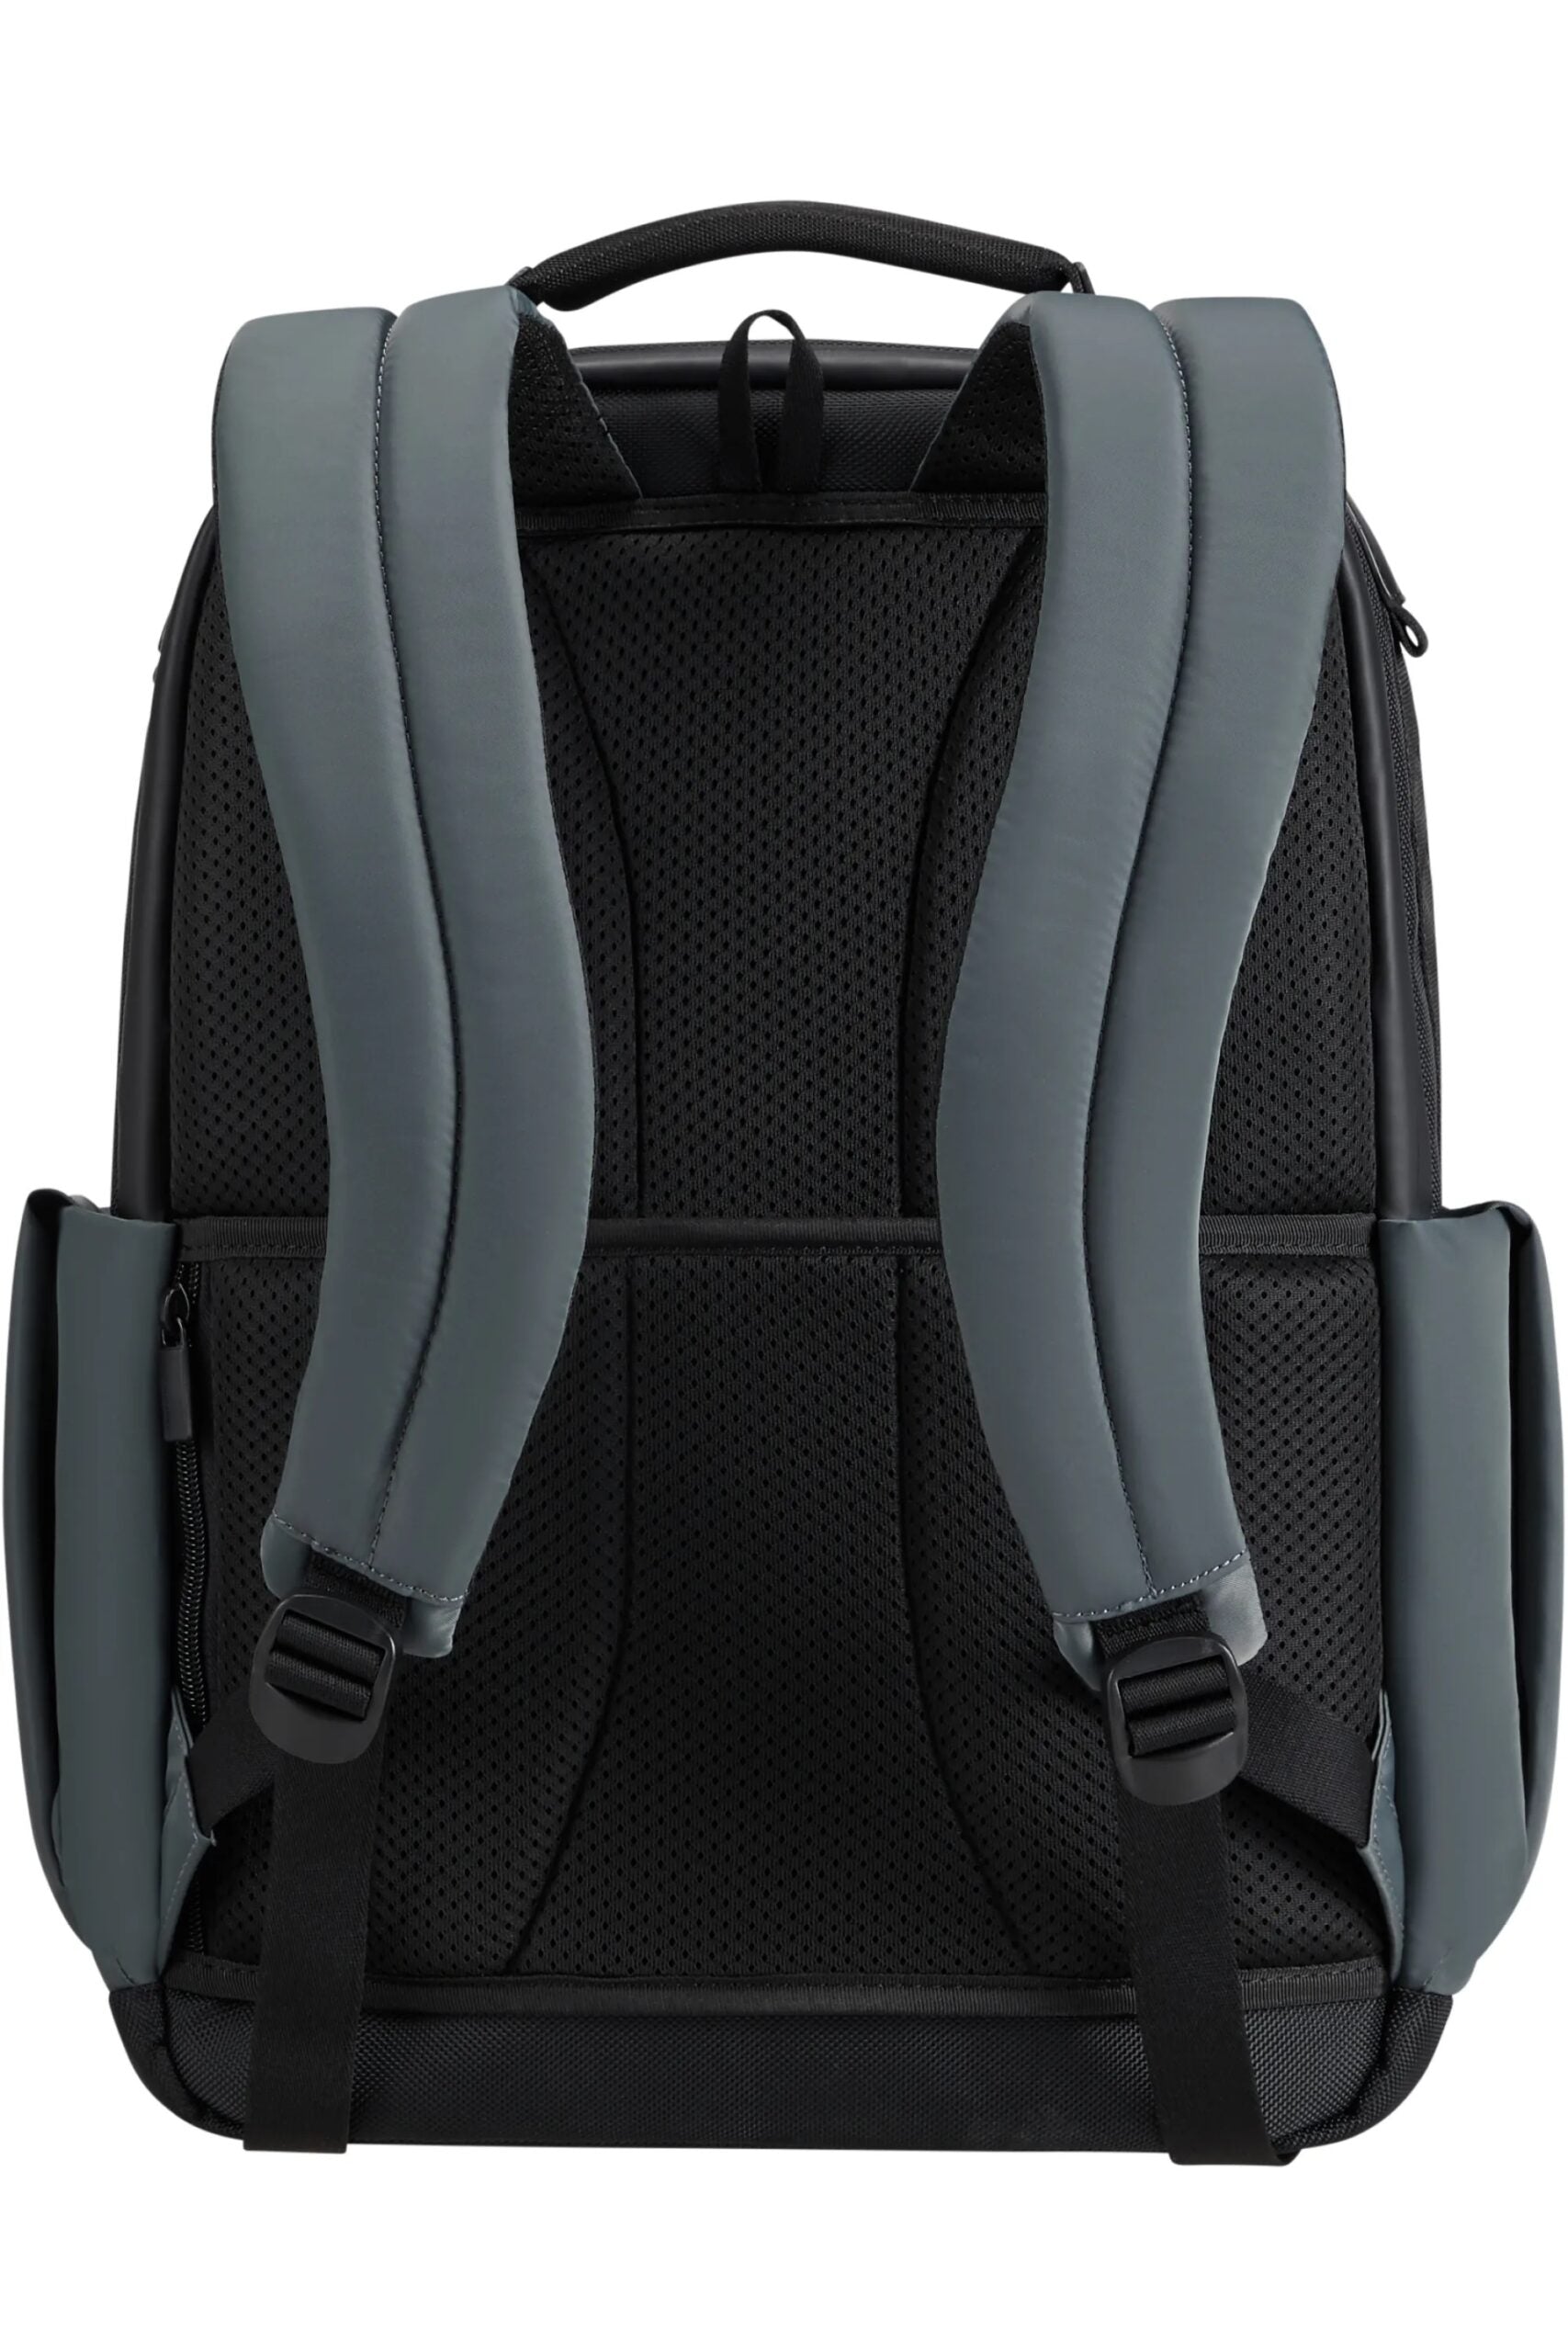 Openroad backpack grey 15.6 3